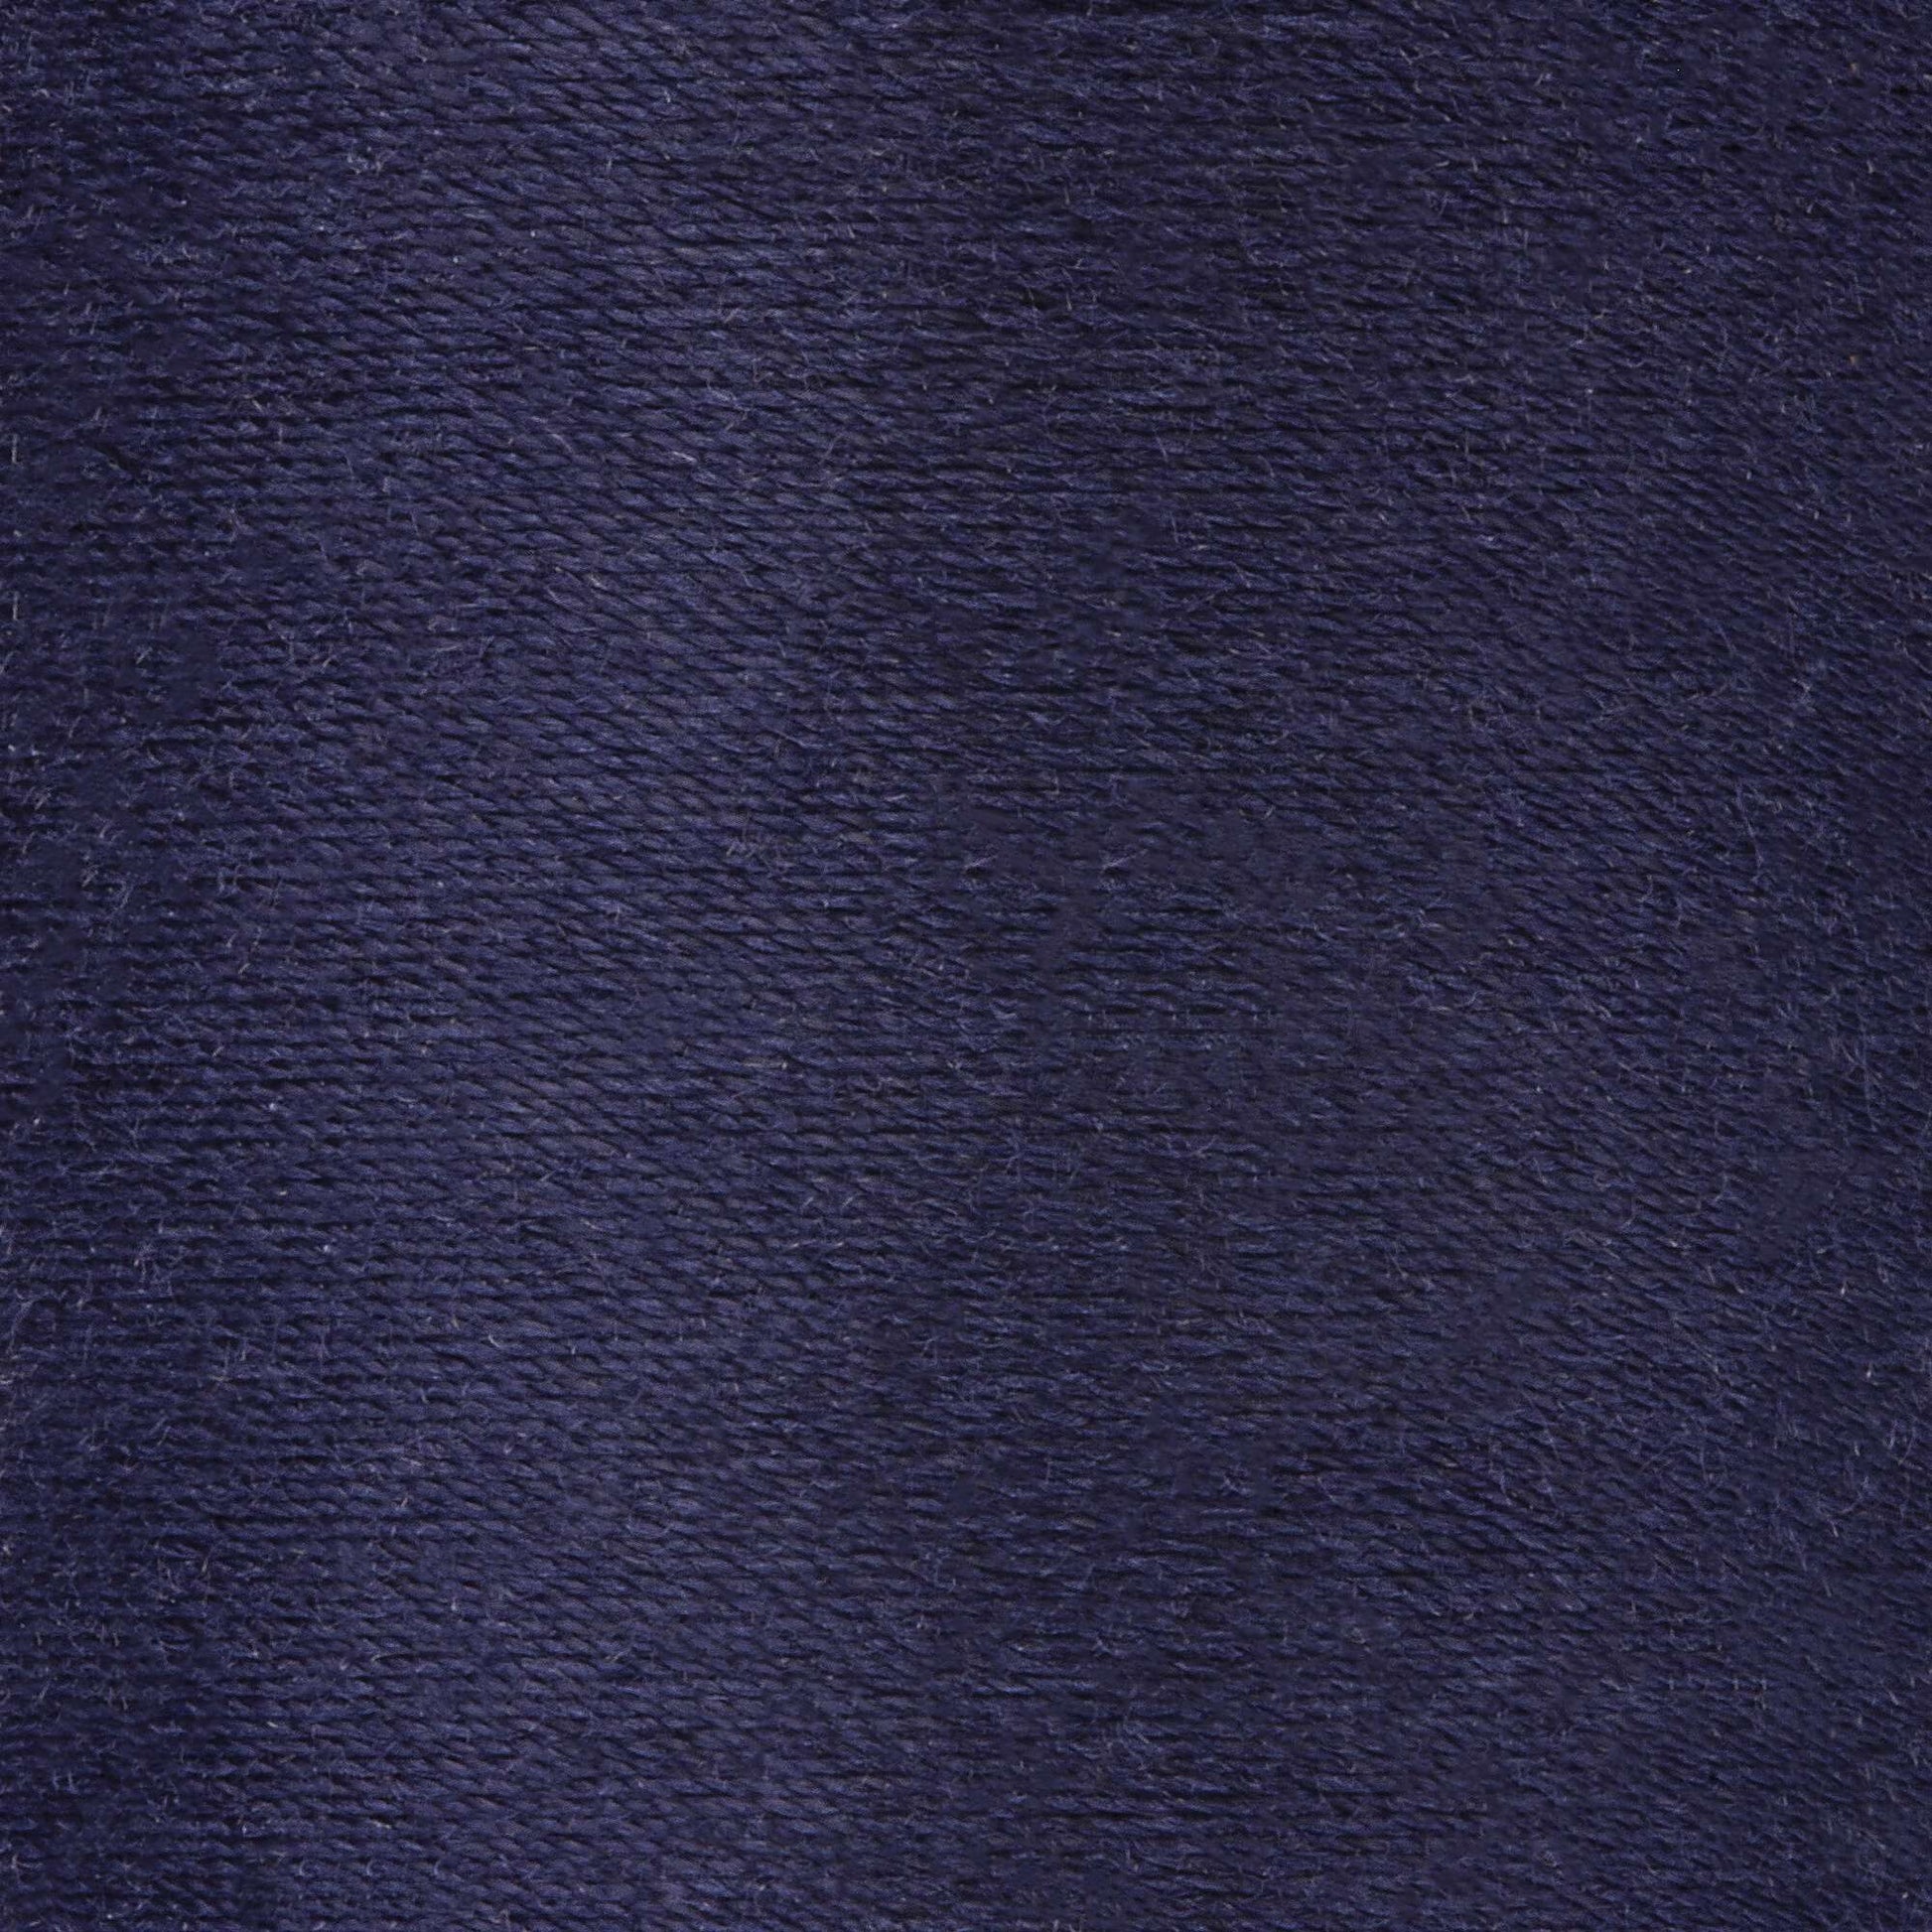 Coats & Clark Cotton Covered Quilting & Piecing Thread (250 Yards) Navy